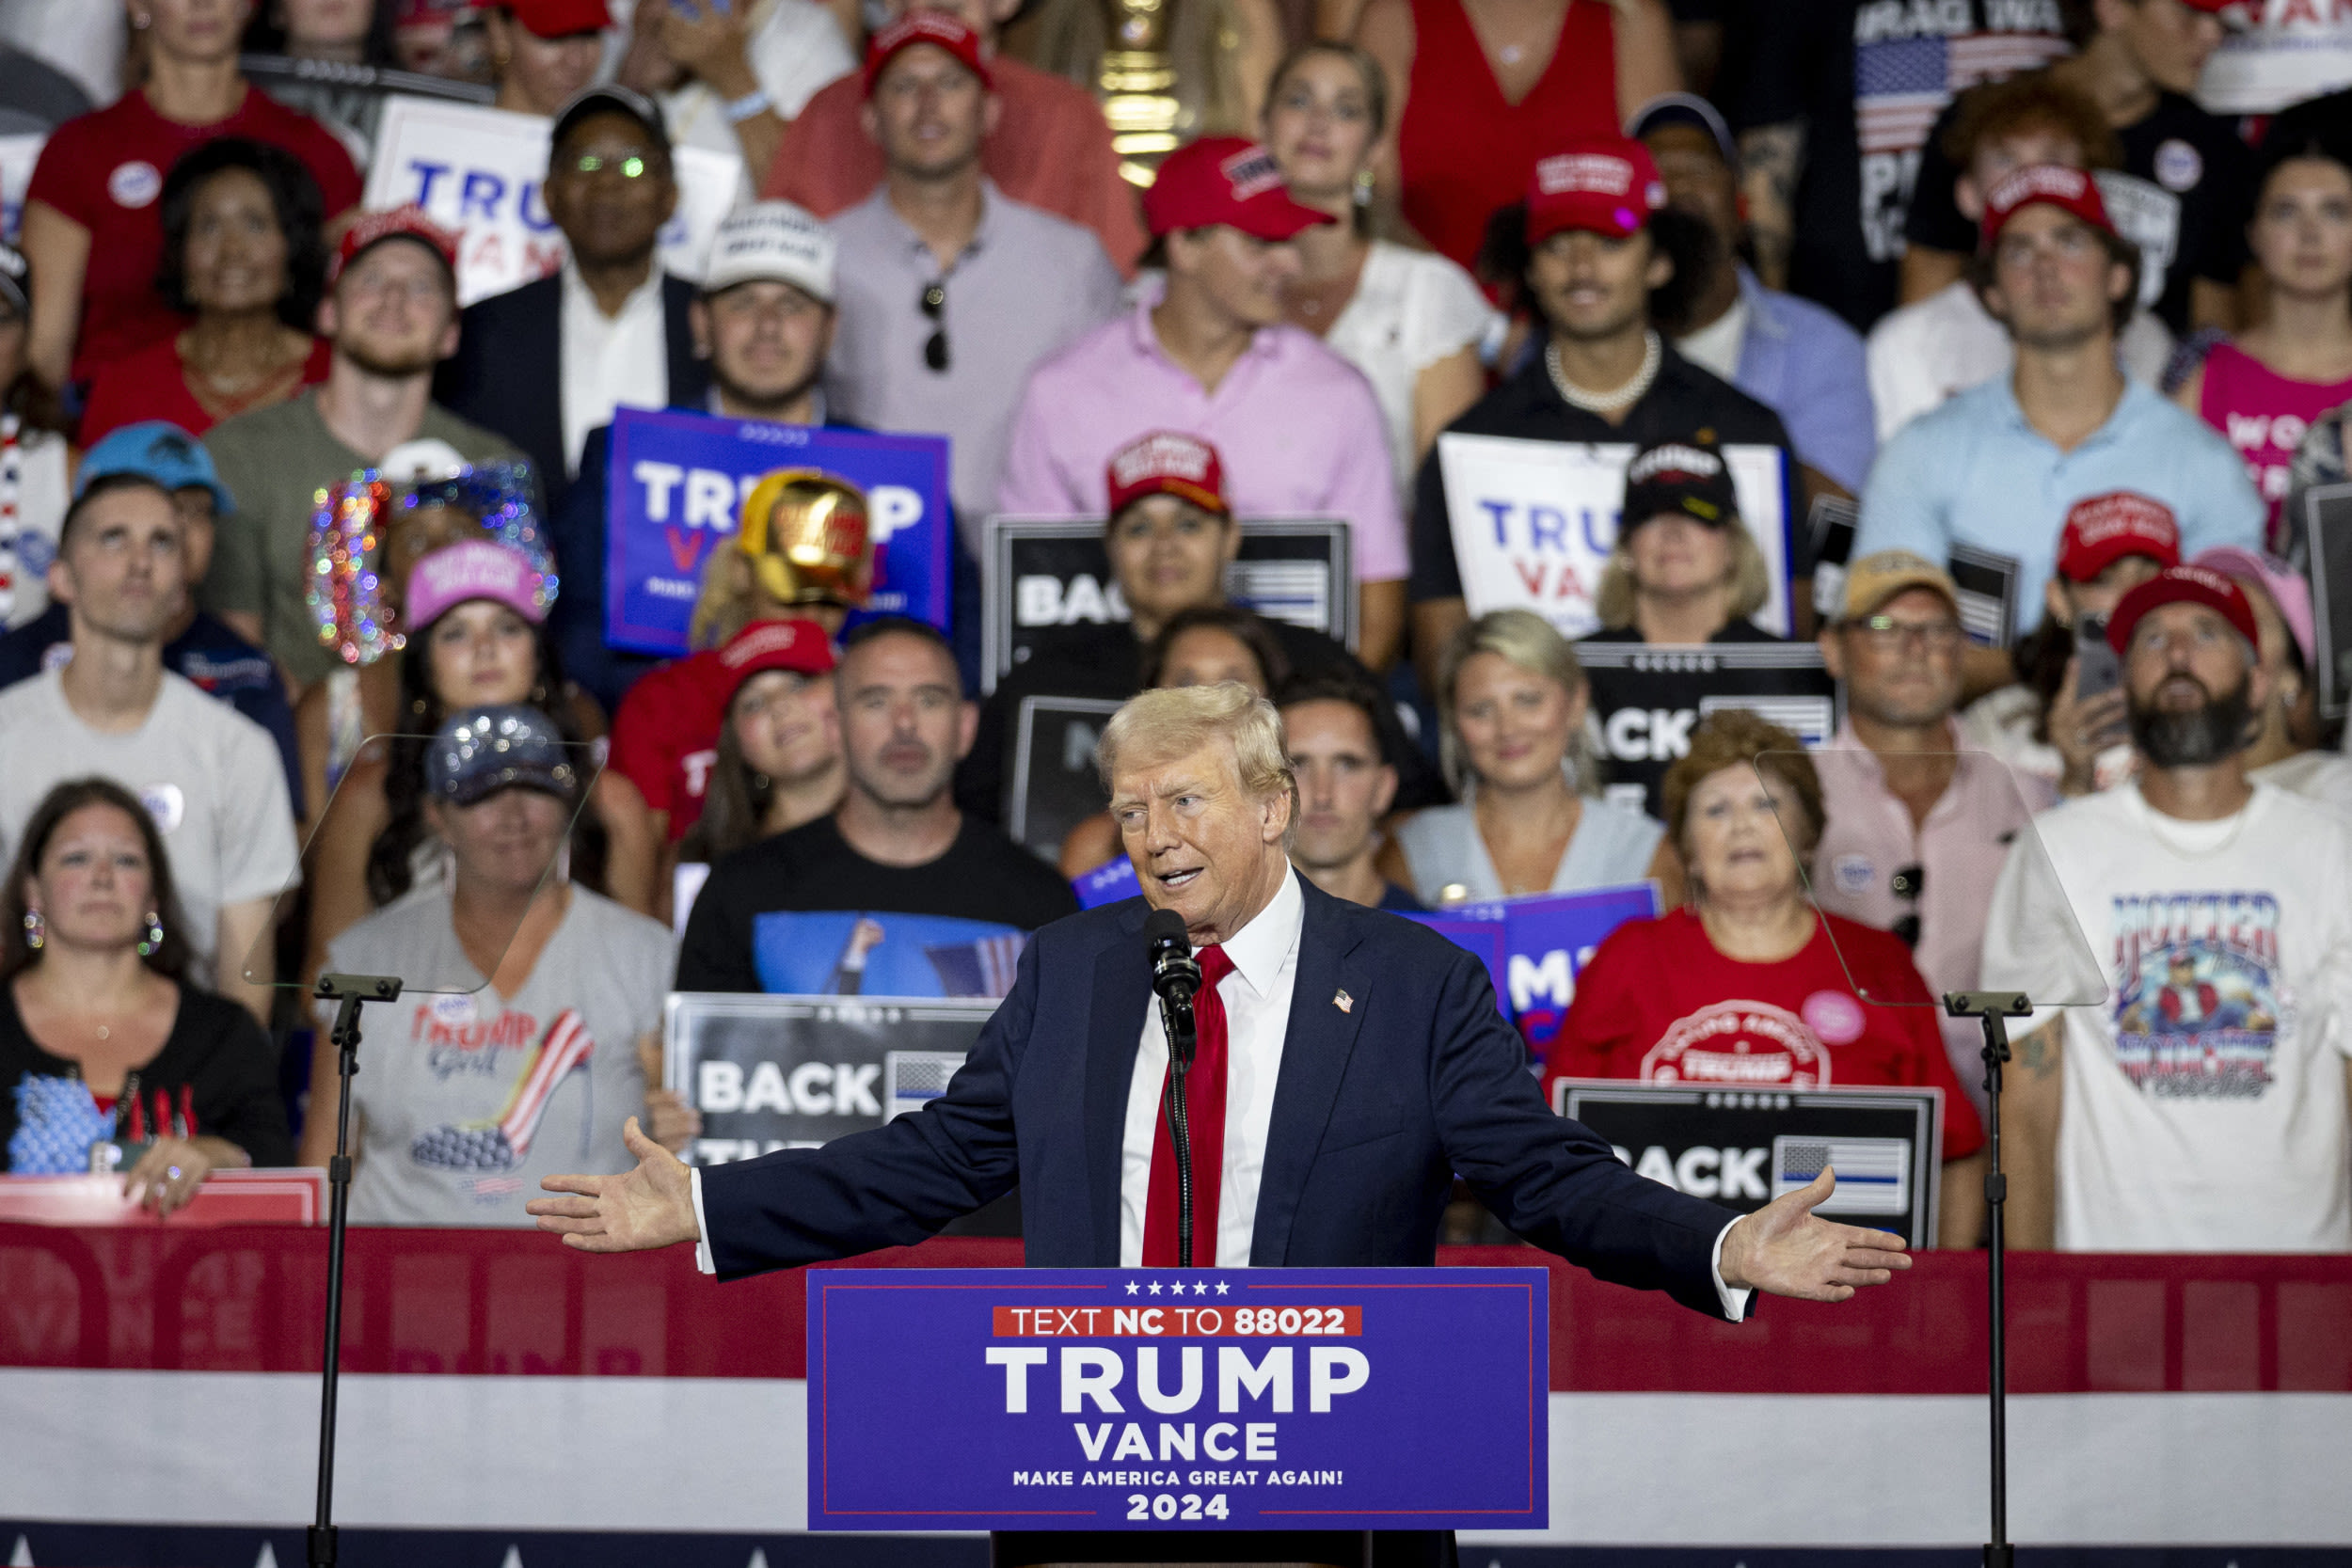 Donald Trump's crowd size claims face pushback